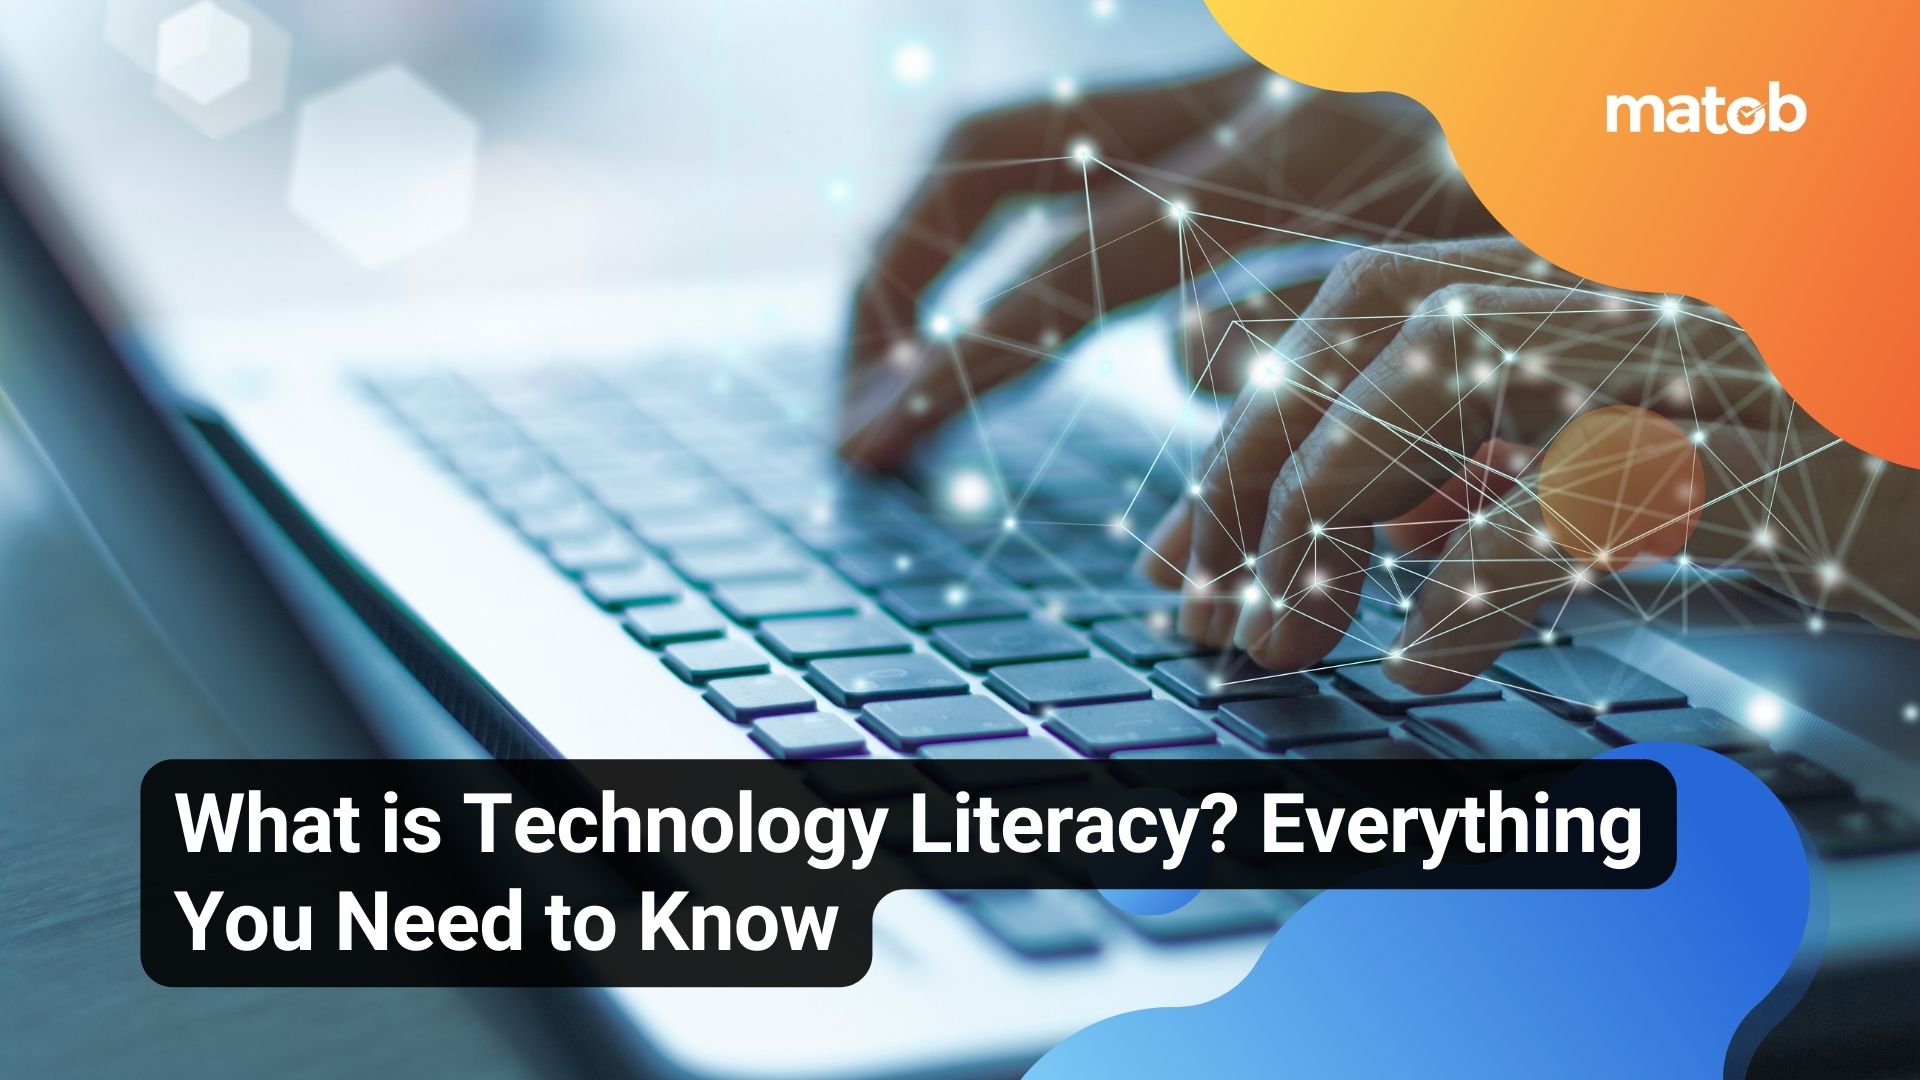 What is Technology Literacy? Everything You Need to Know